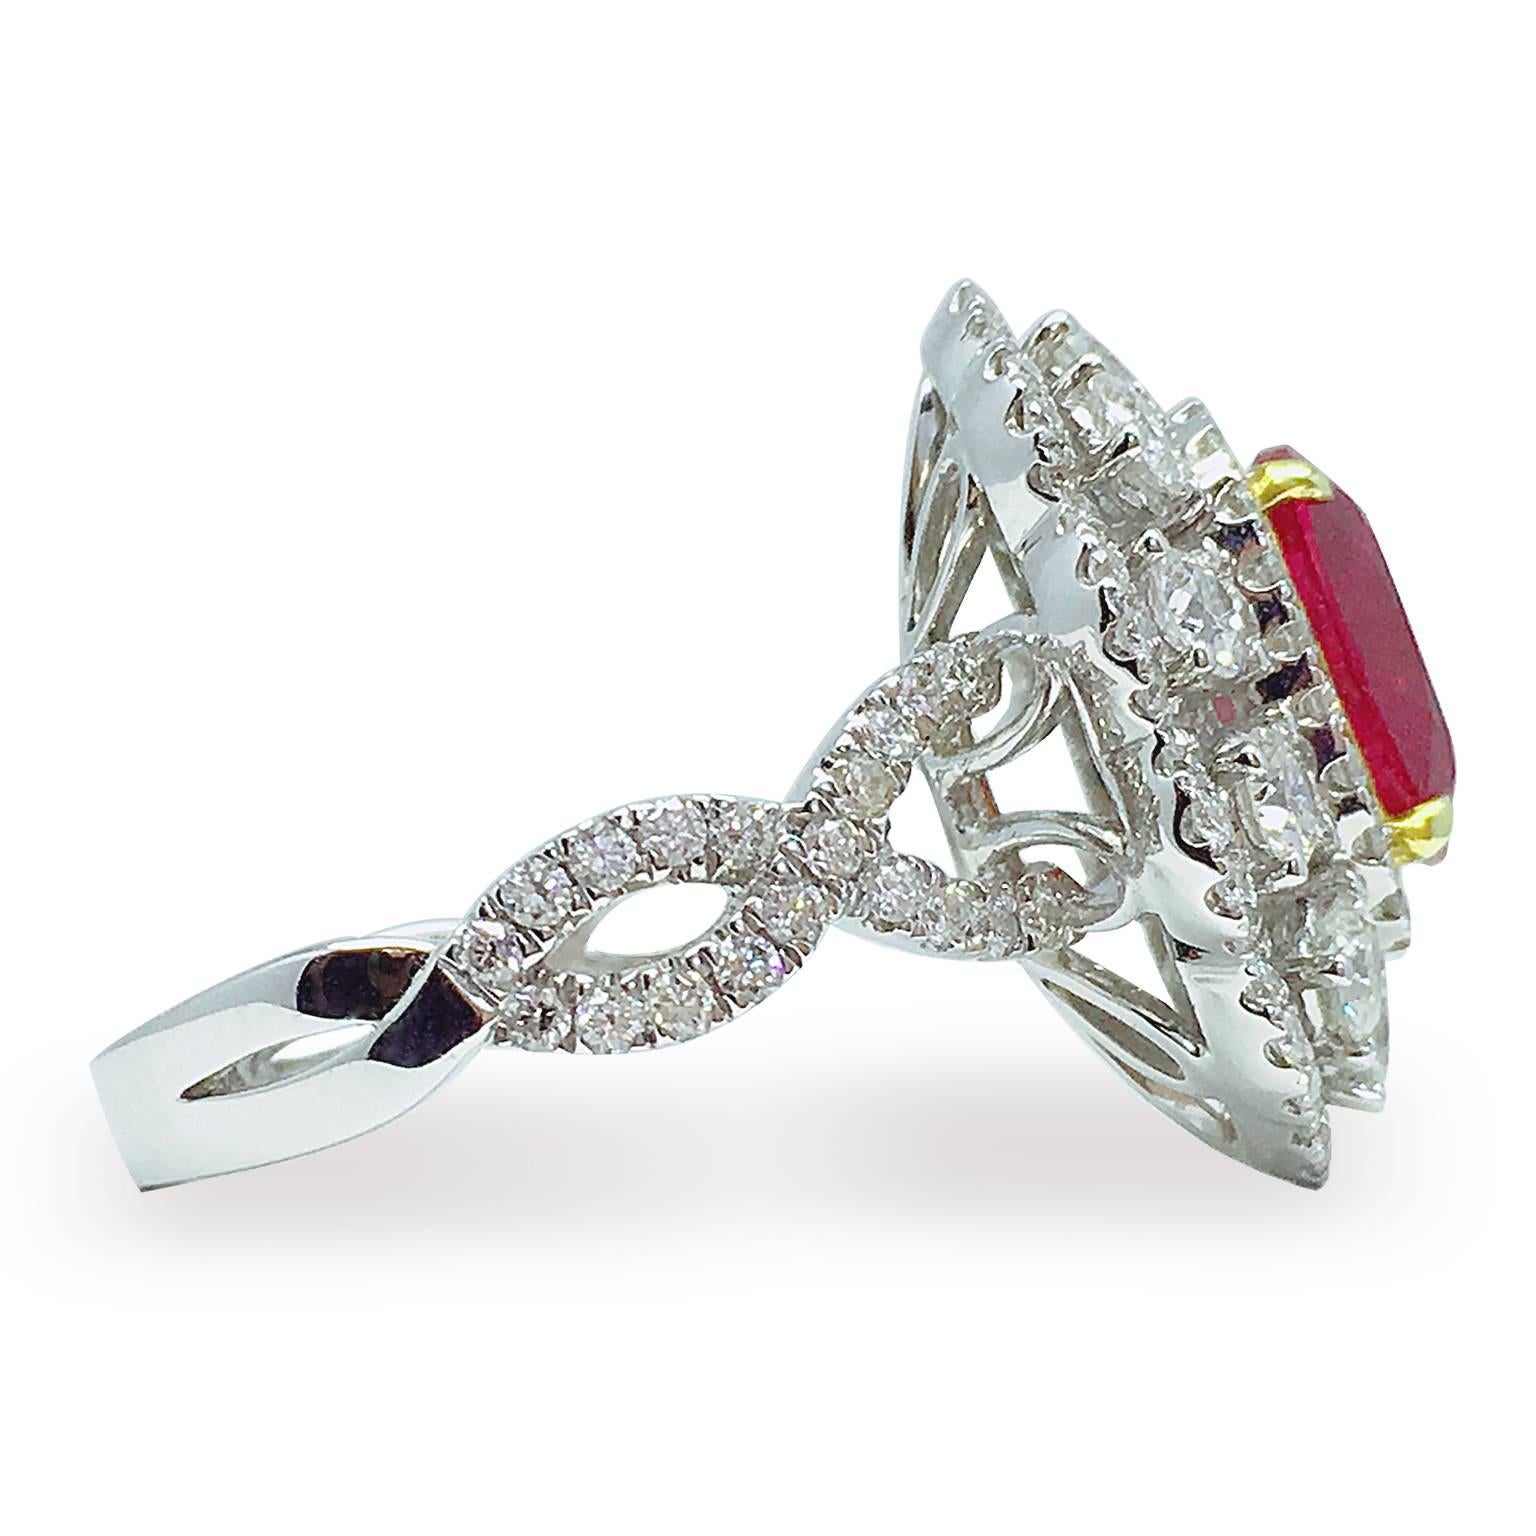 GILIN 2.15 Carat Oval cut Pigeon's Blood Burmese Ruby center stone, H(a), accompanied by 1.49 carat round brilliant diamonds. Made in 18K white gold. Ring size US 5.75 (resizable). 

GRS: 2012-030514T